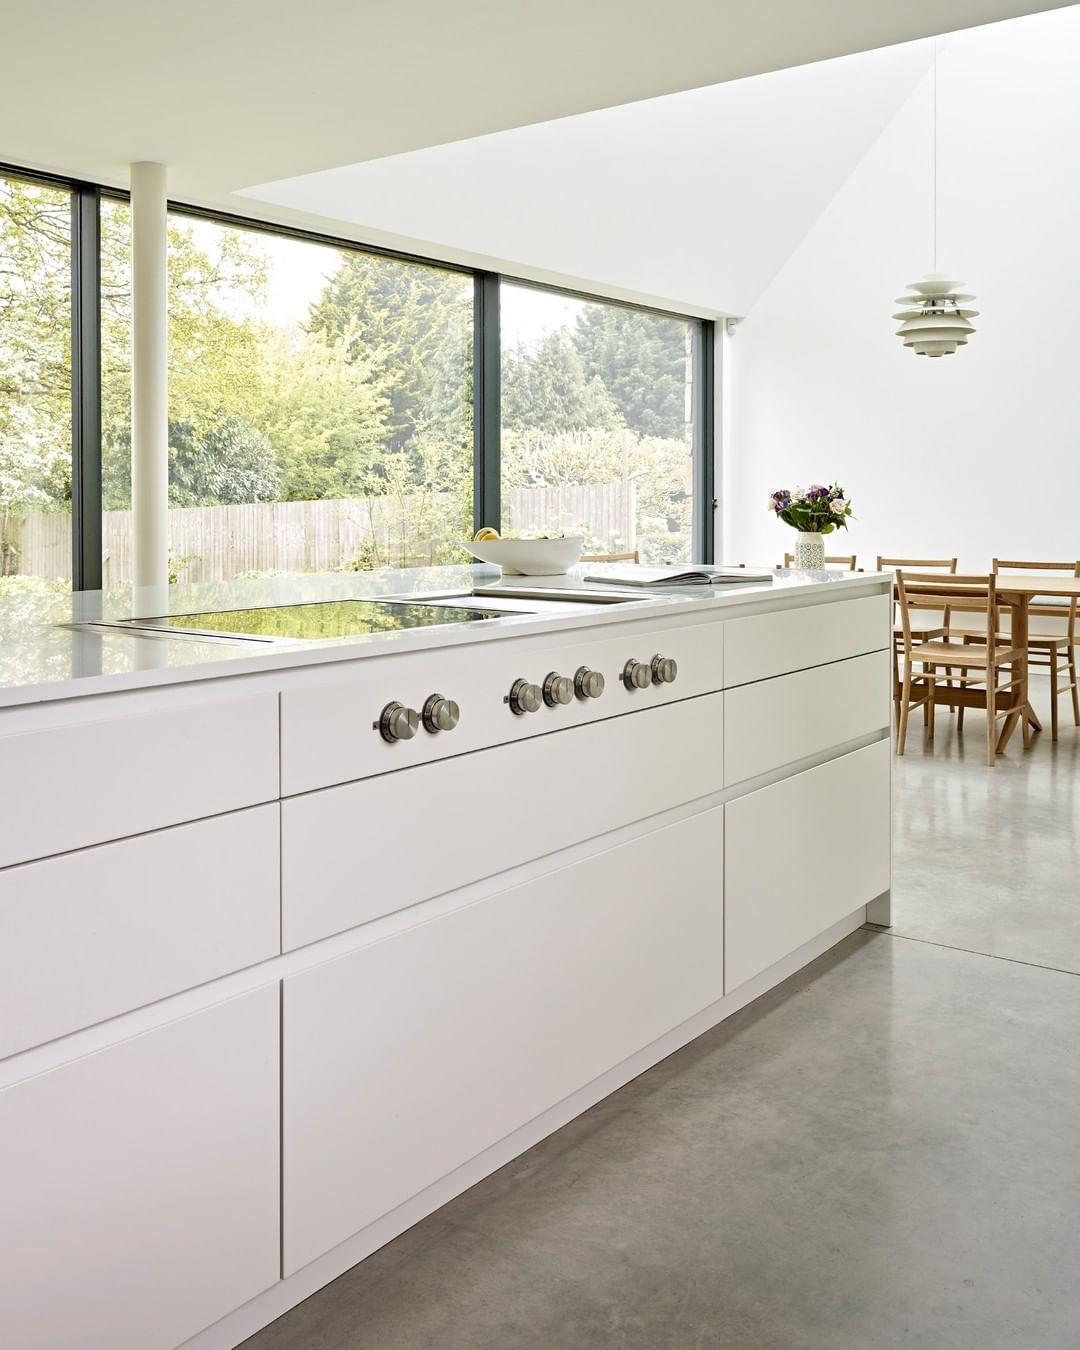 Large white kitchen with white cabinets and big windows. Photo by Instagram user @brayerdesign